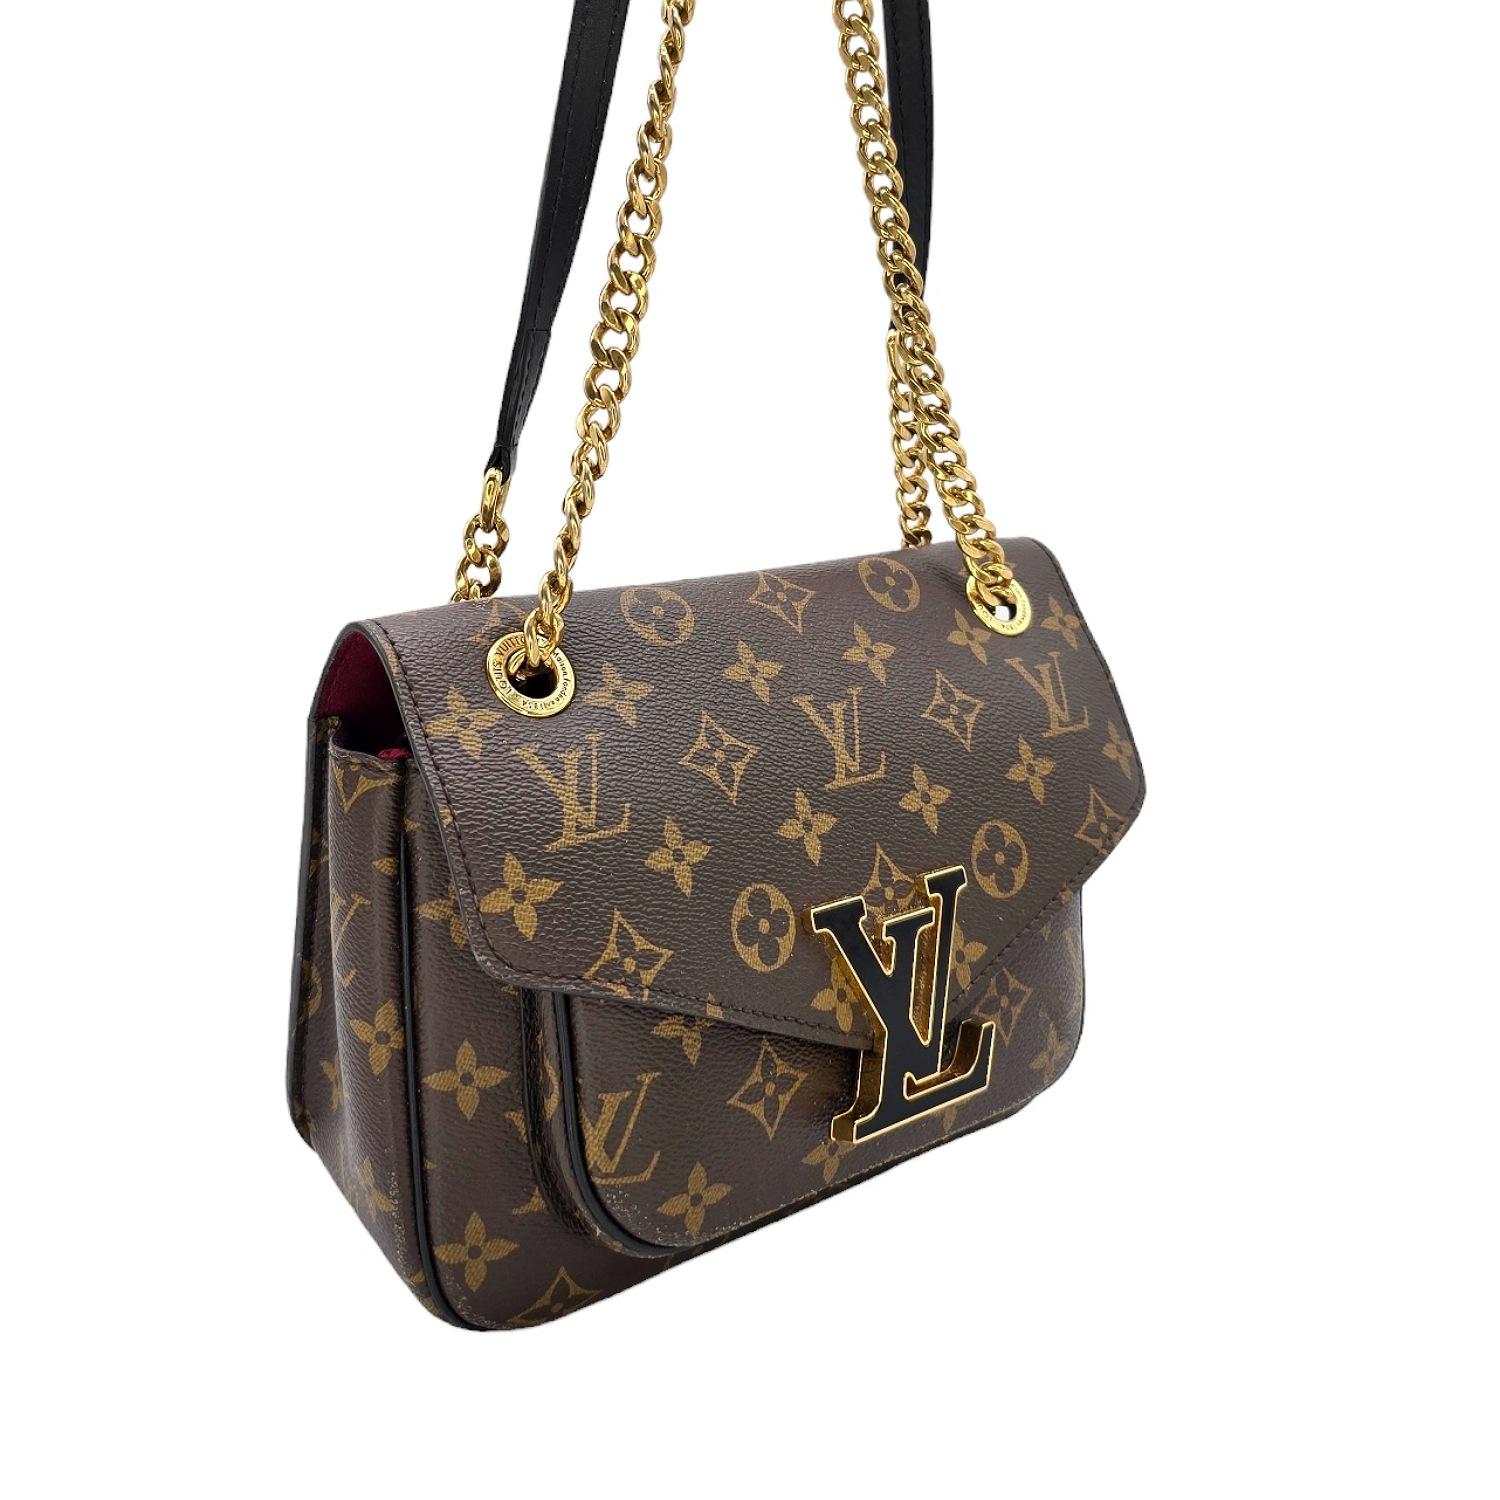 Indulge in luxury with the Louis Vuitton Monogram Passy Crossbody Bag. Crafted from durable Monogrammed coated canvas, its elegant design features a frontal LV Monogram Emblem magnetic closure. With dual shoulder straps, including one chain and one